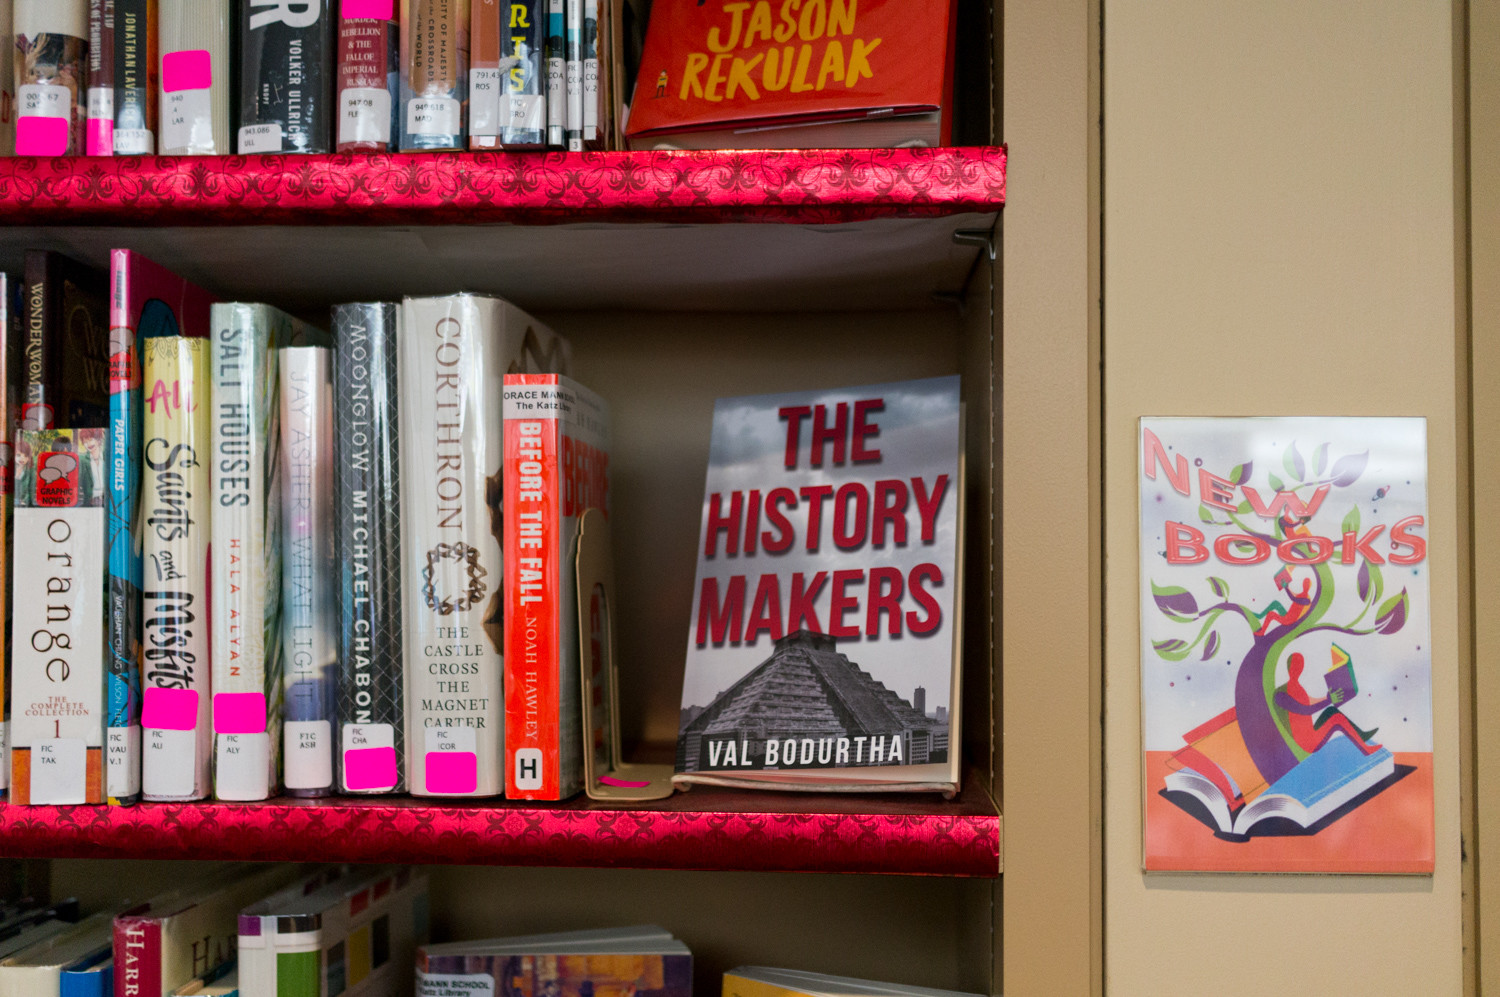 While Val Bodurtha's 'The History Makers' has yet to officially join the catalogue in Horace Mann's library, it will find a home on the new books shelf and later in the sci-fi and fantasy section.